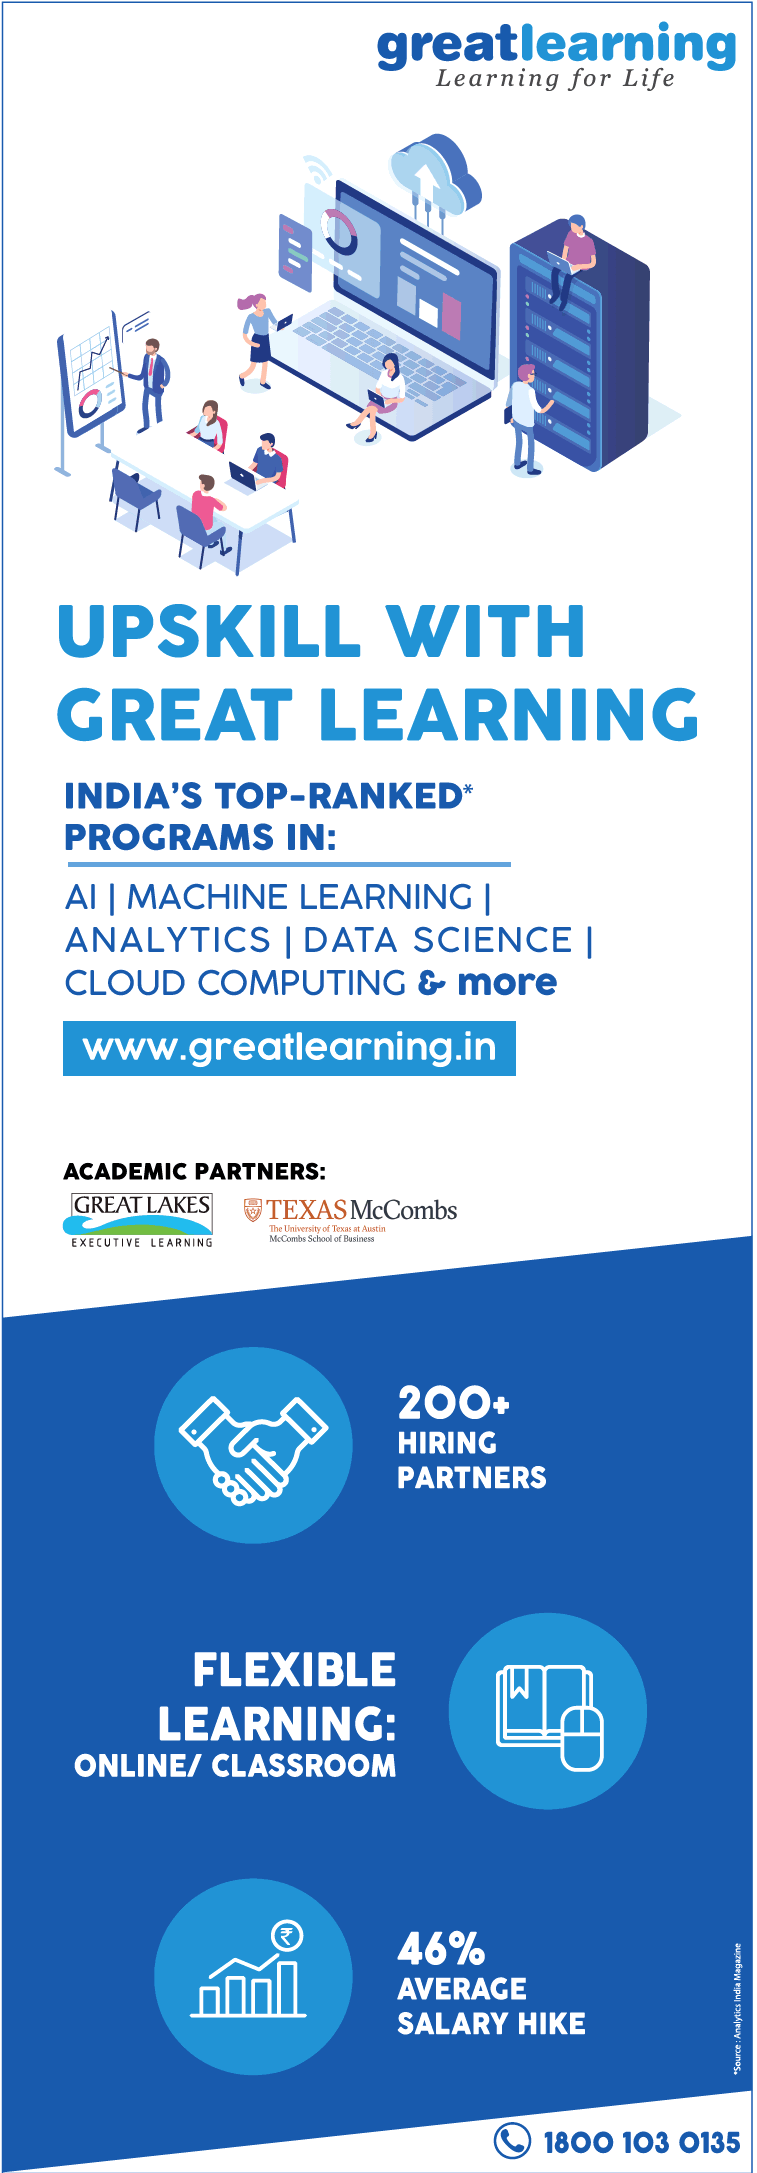 greatlearning-upskill-with-great-learning-indias-top-ranked-programs-ad-times-of-india-bangalore-22-02-2019.png